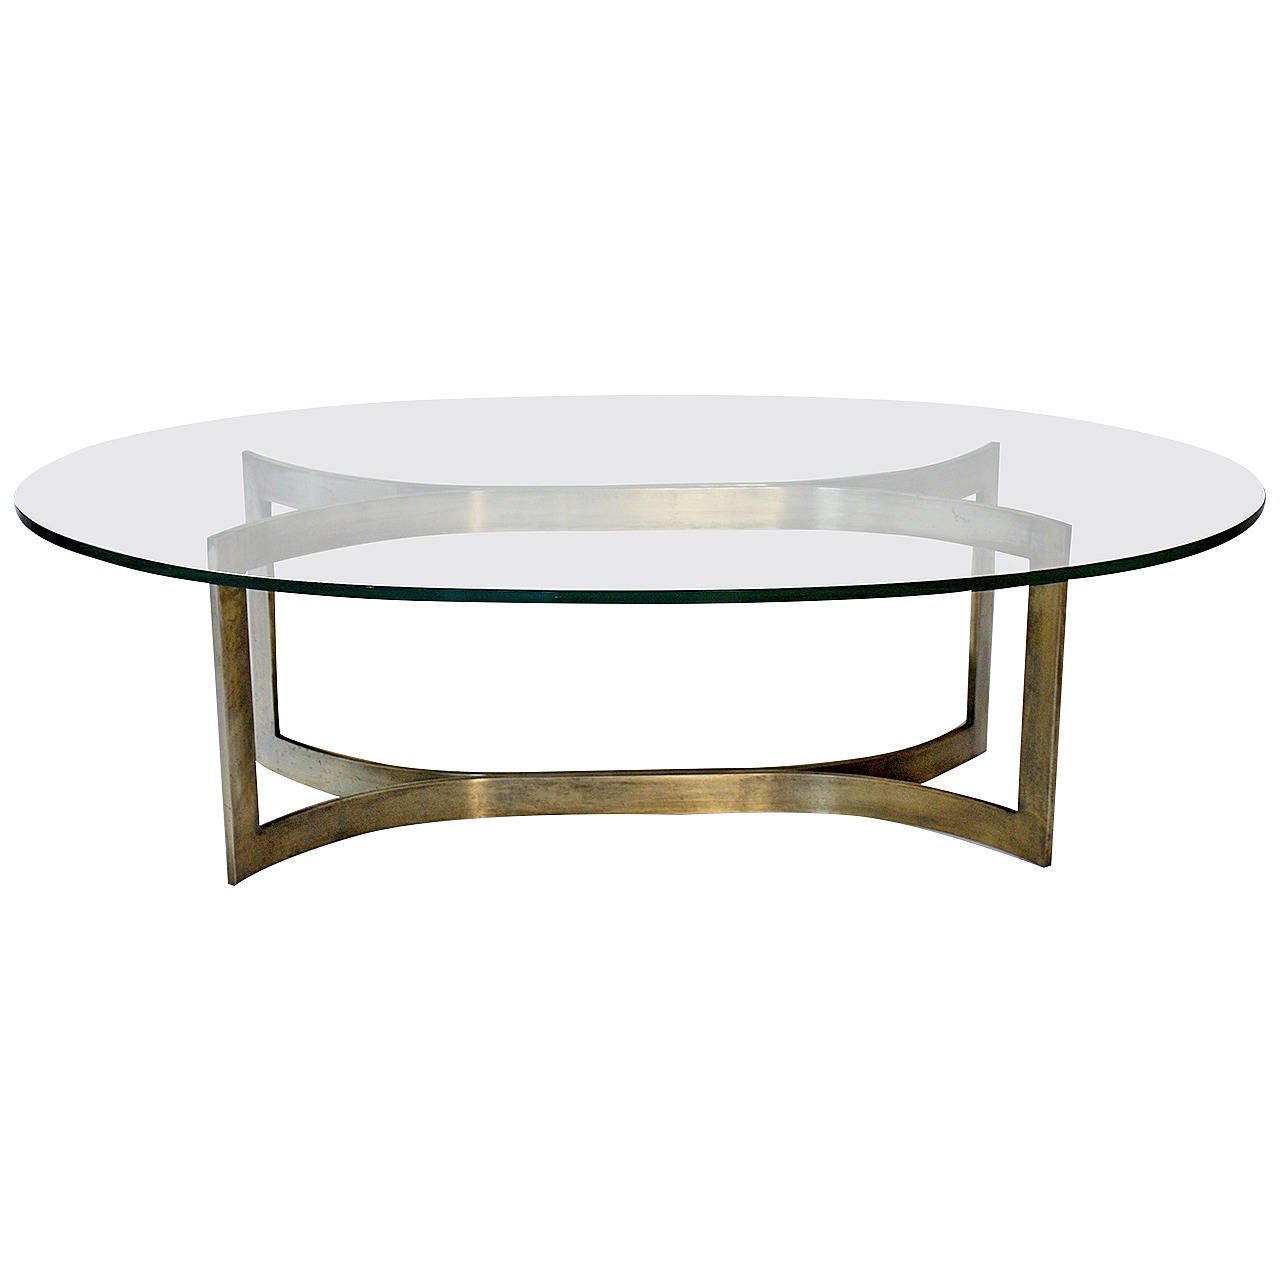 Well Liked Glass And Gold Oval Coffee Tables With Regard To Baker Bronze And Glass Oval Cocktail Table At 1stdibs (Gallery 13 of 20)